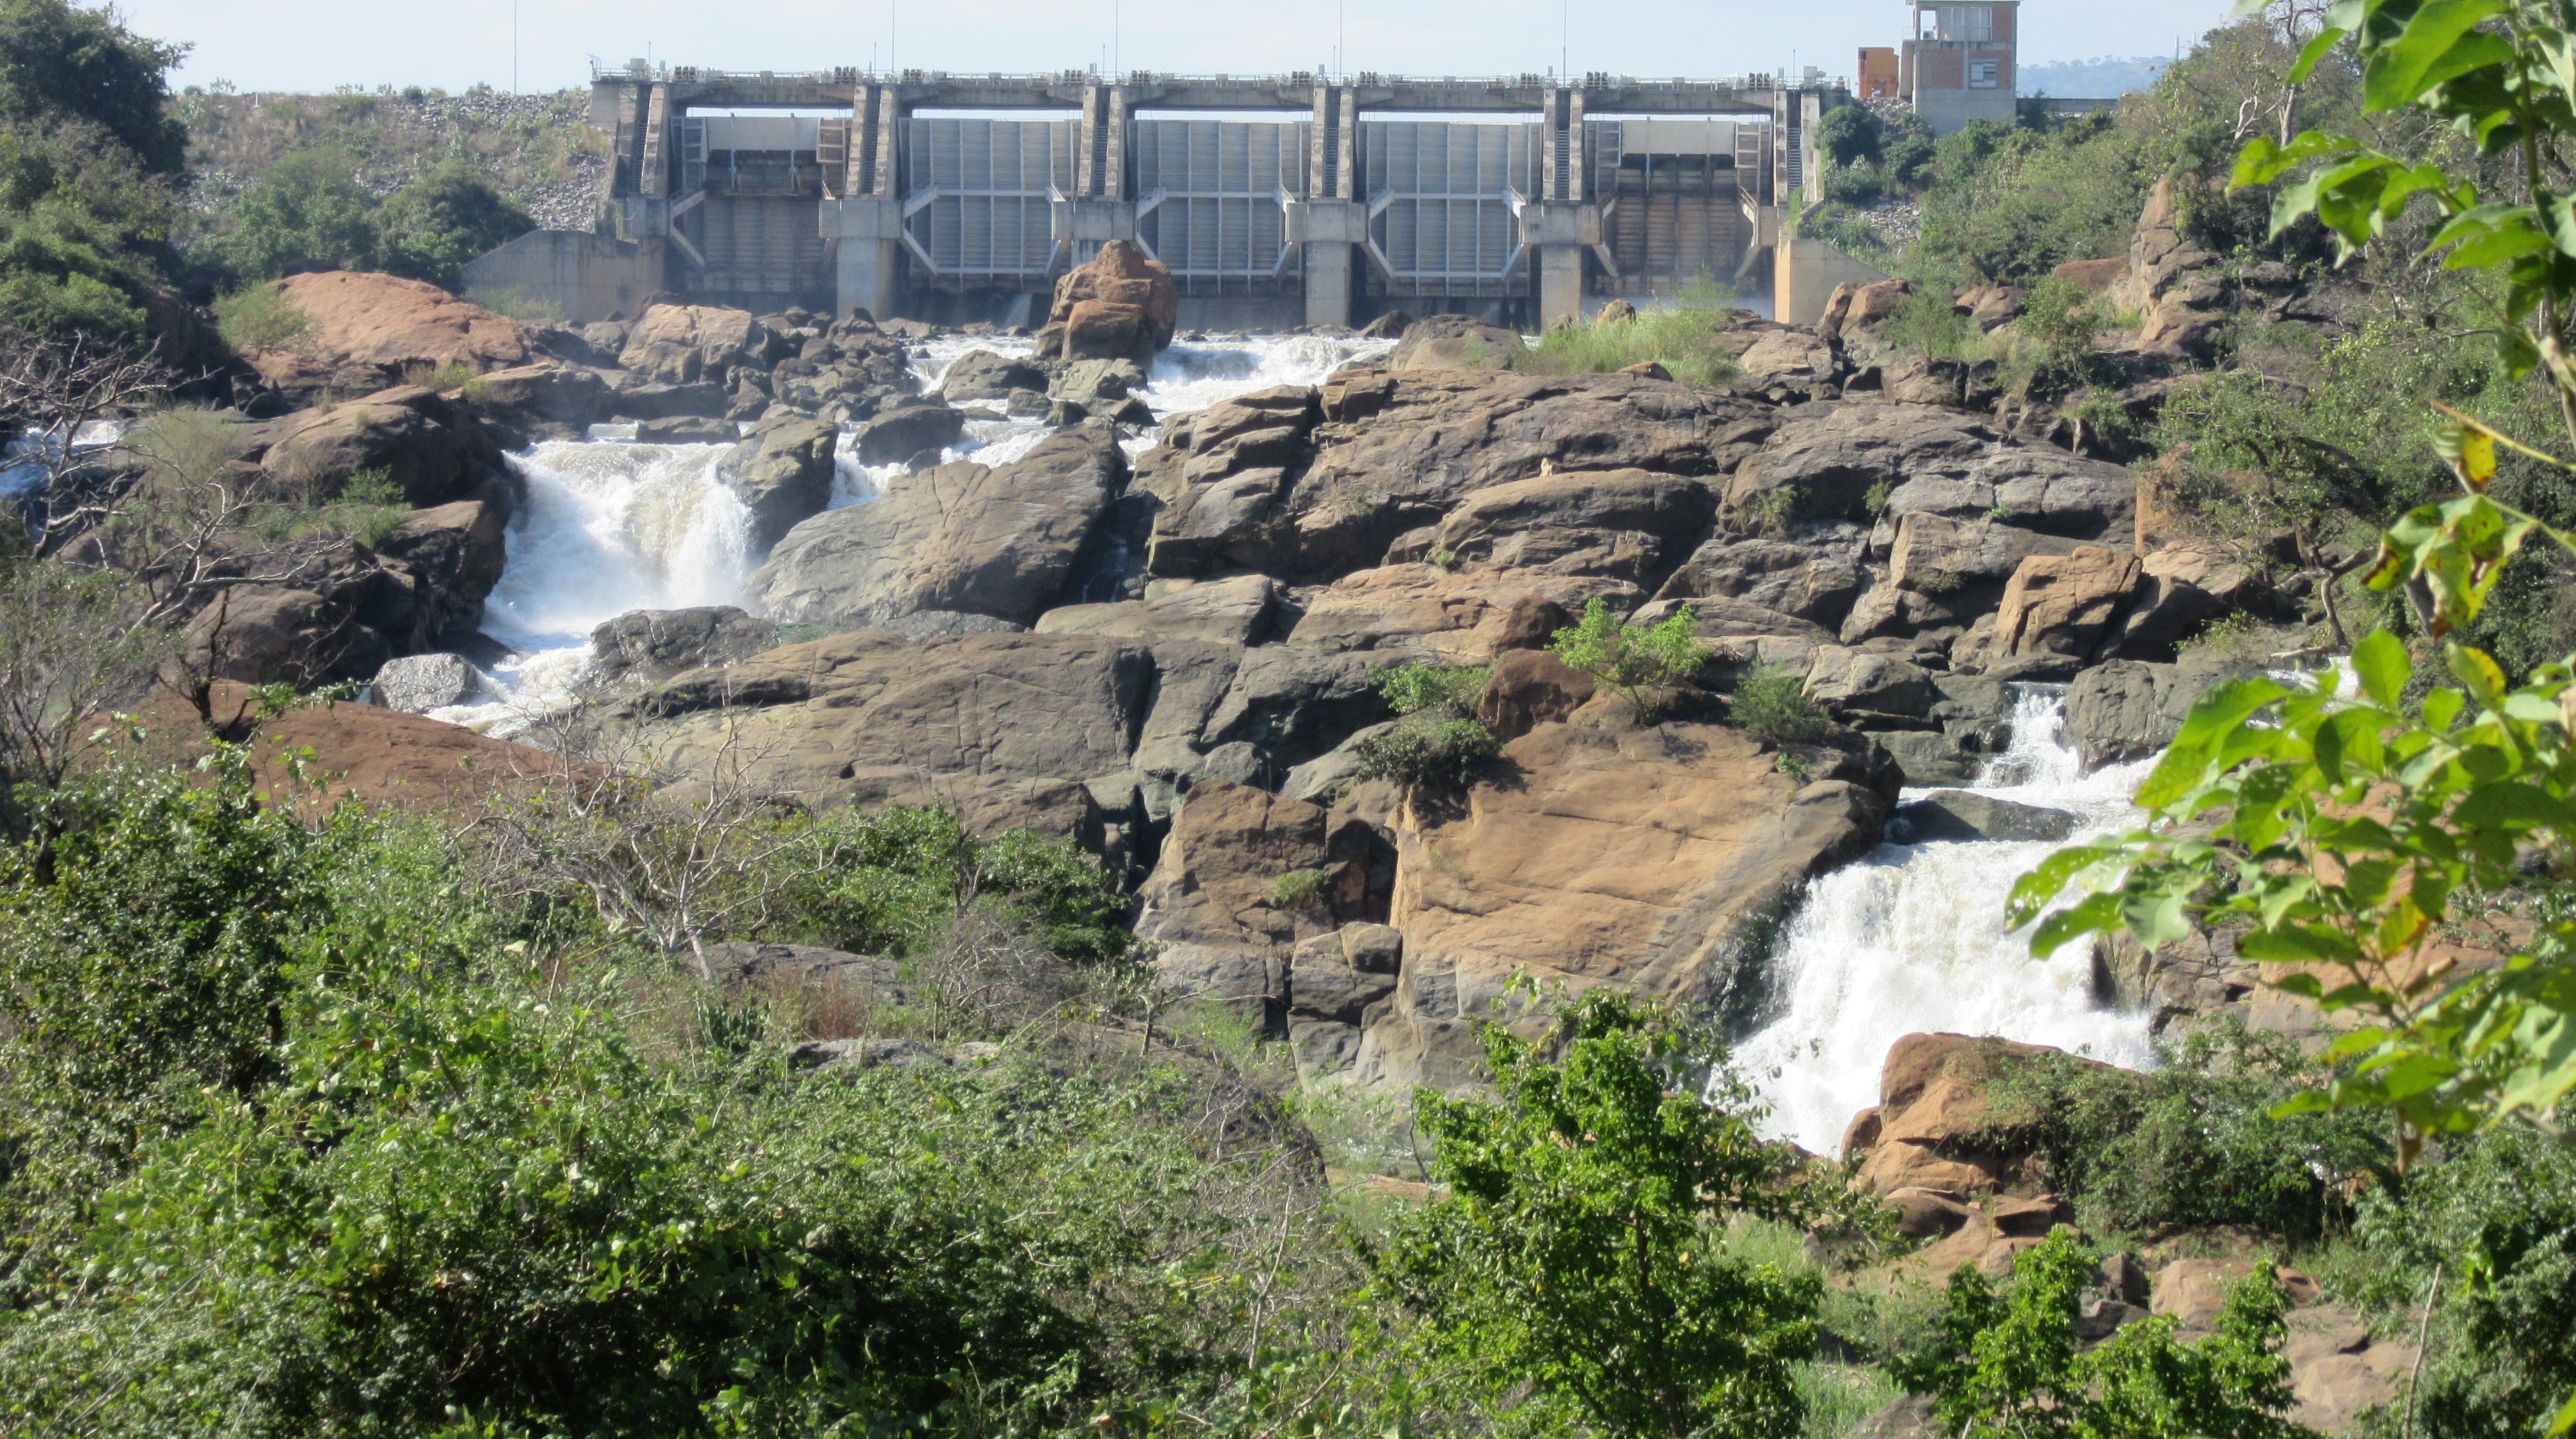 Malawi Govt Secures K60bn From World Bank to Rehabilitate the Damaged Kapichira Hydro Power